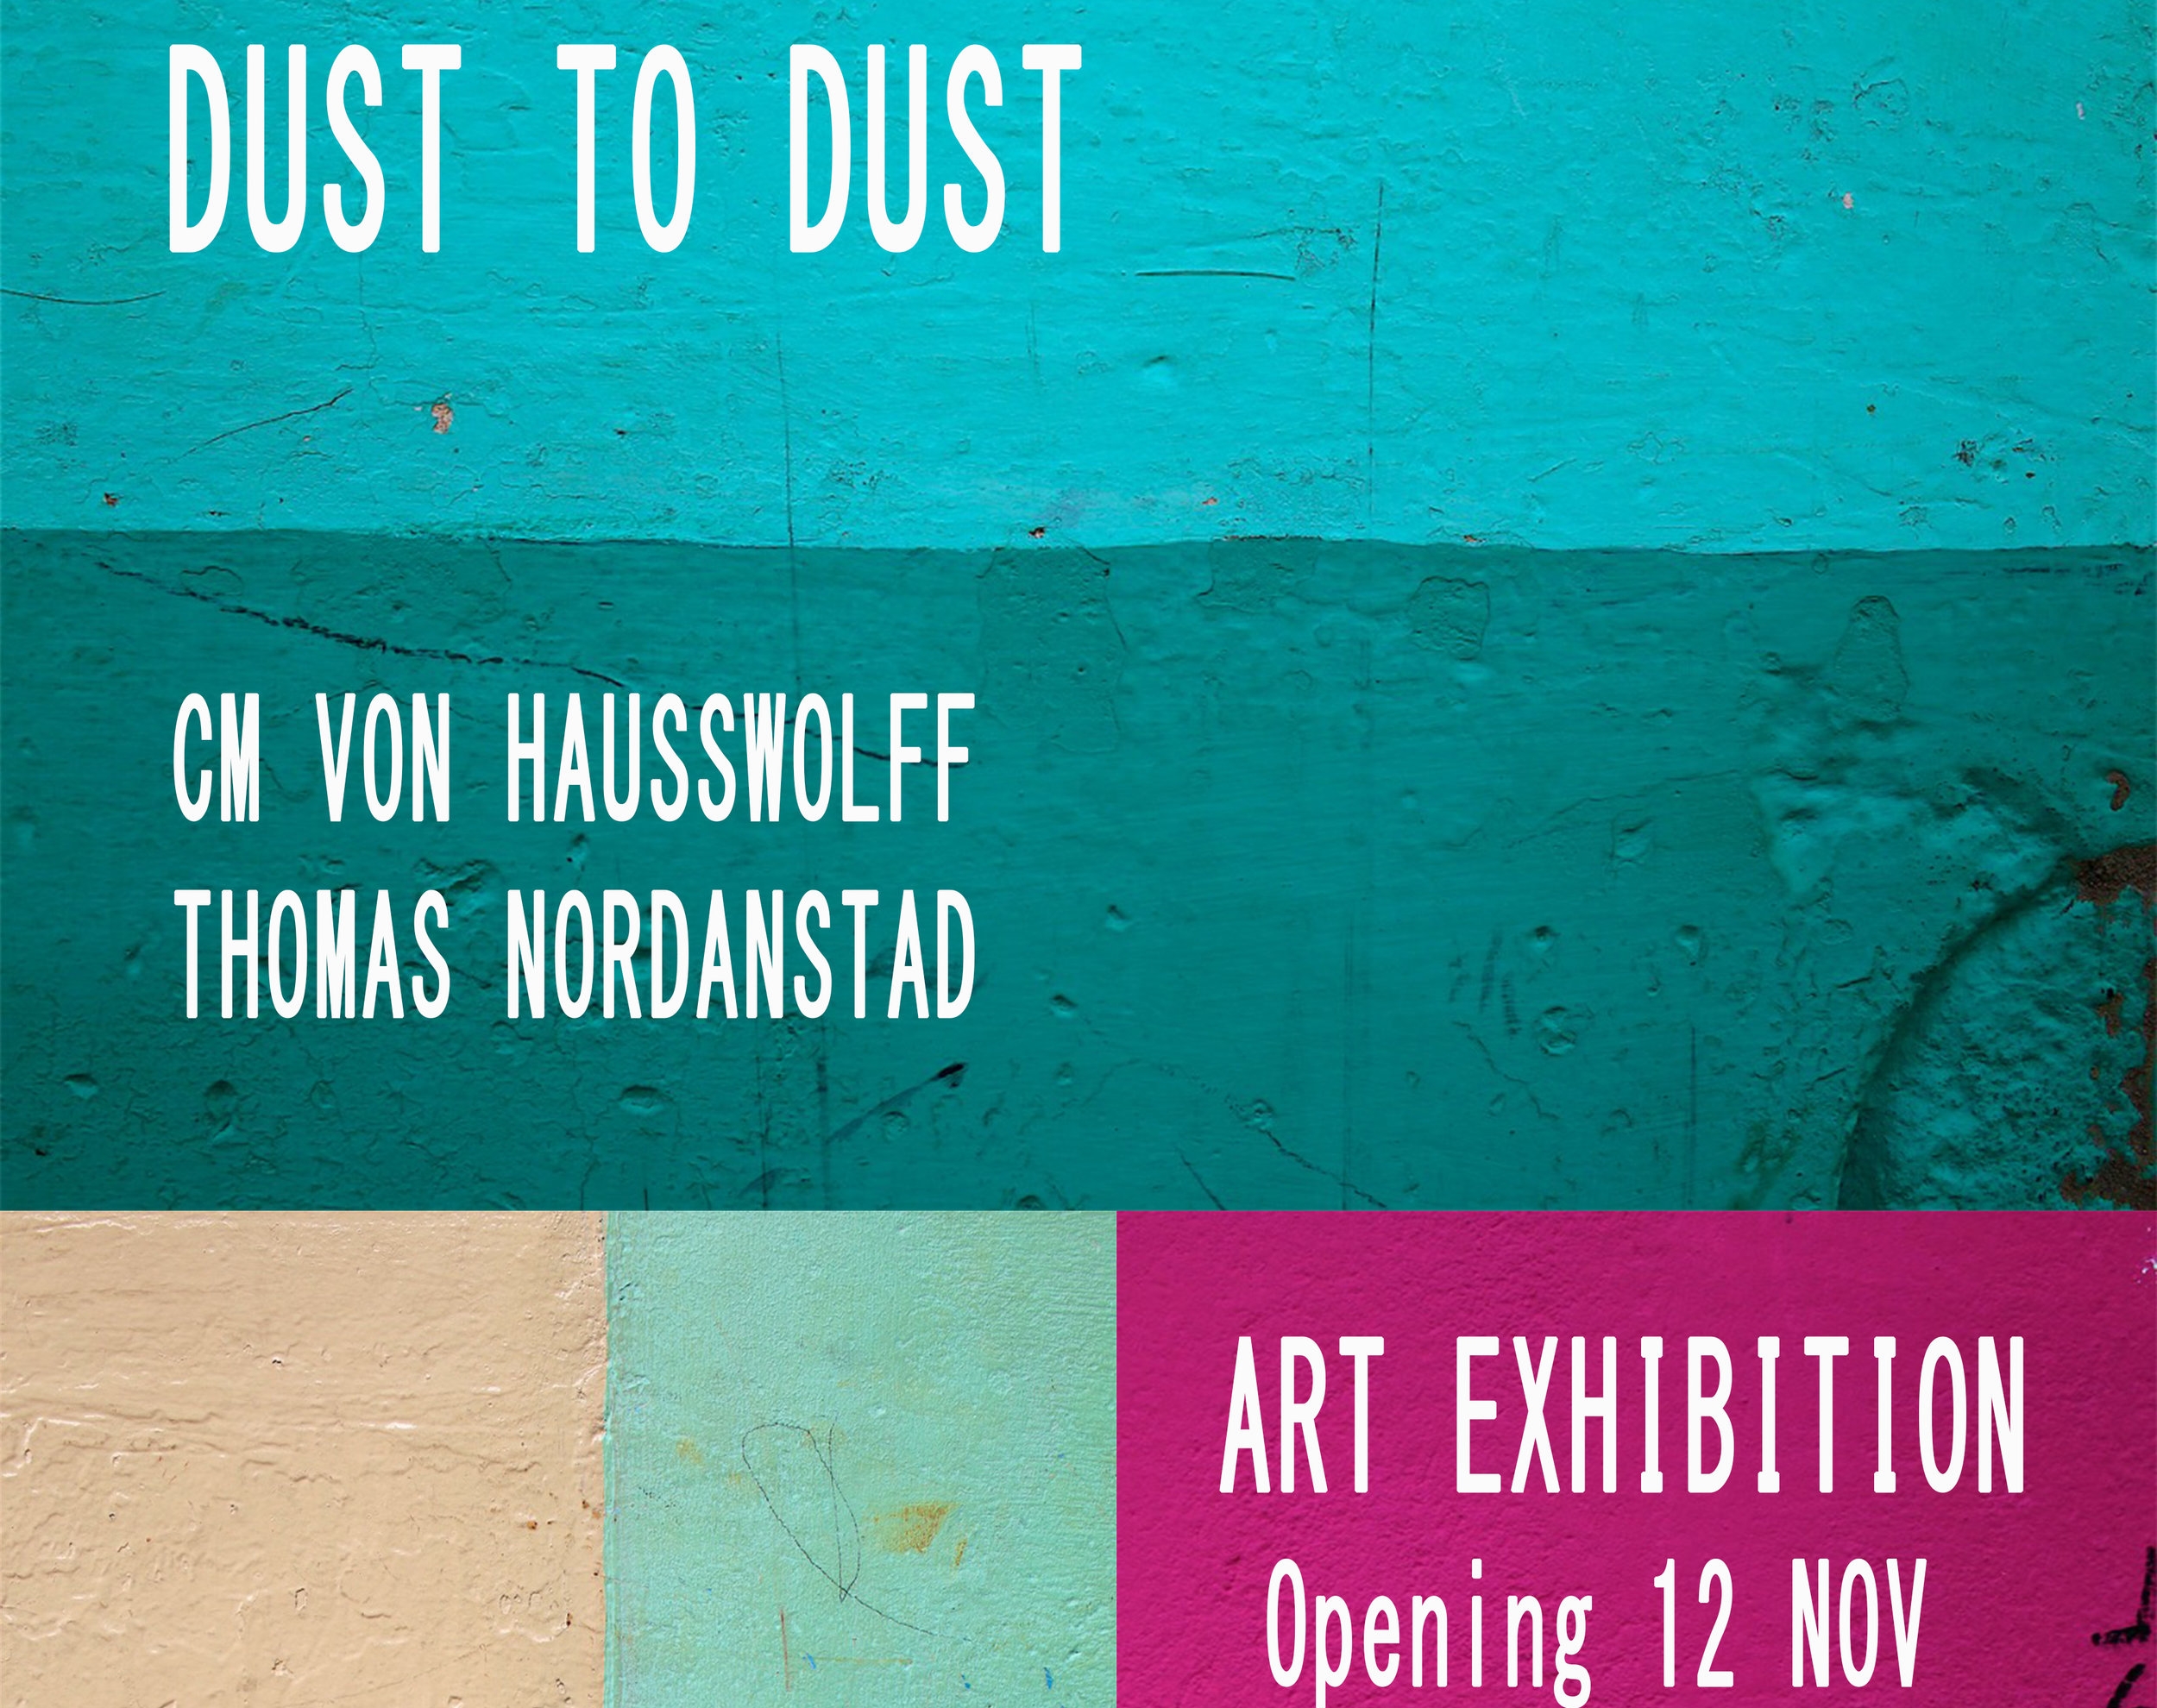 Dust to dust poster_exhibition.jpg